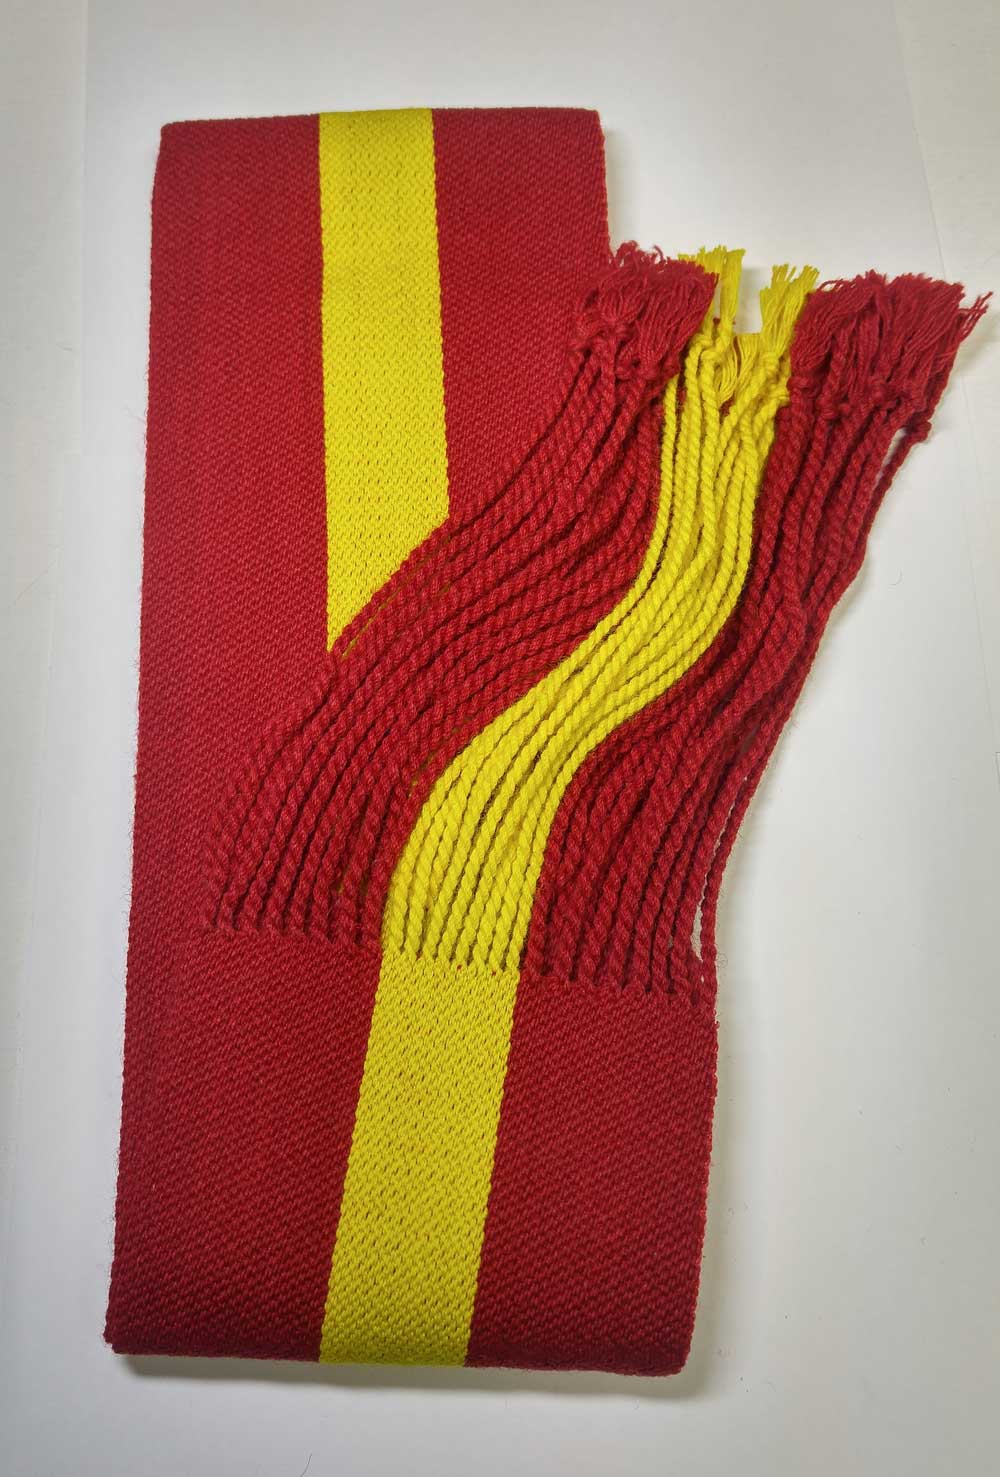 Sash: Sgt., Red with Yellow Stripe, 18/19C, Large